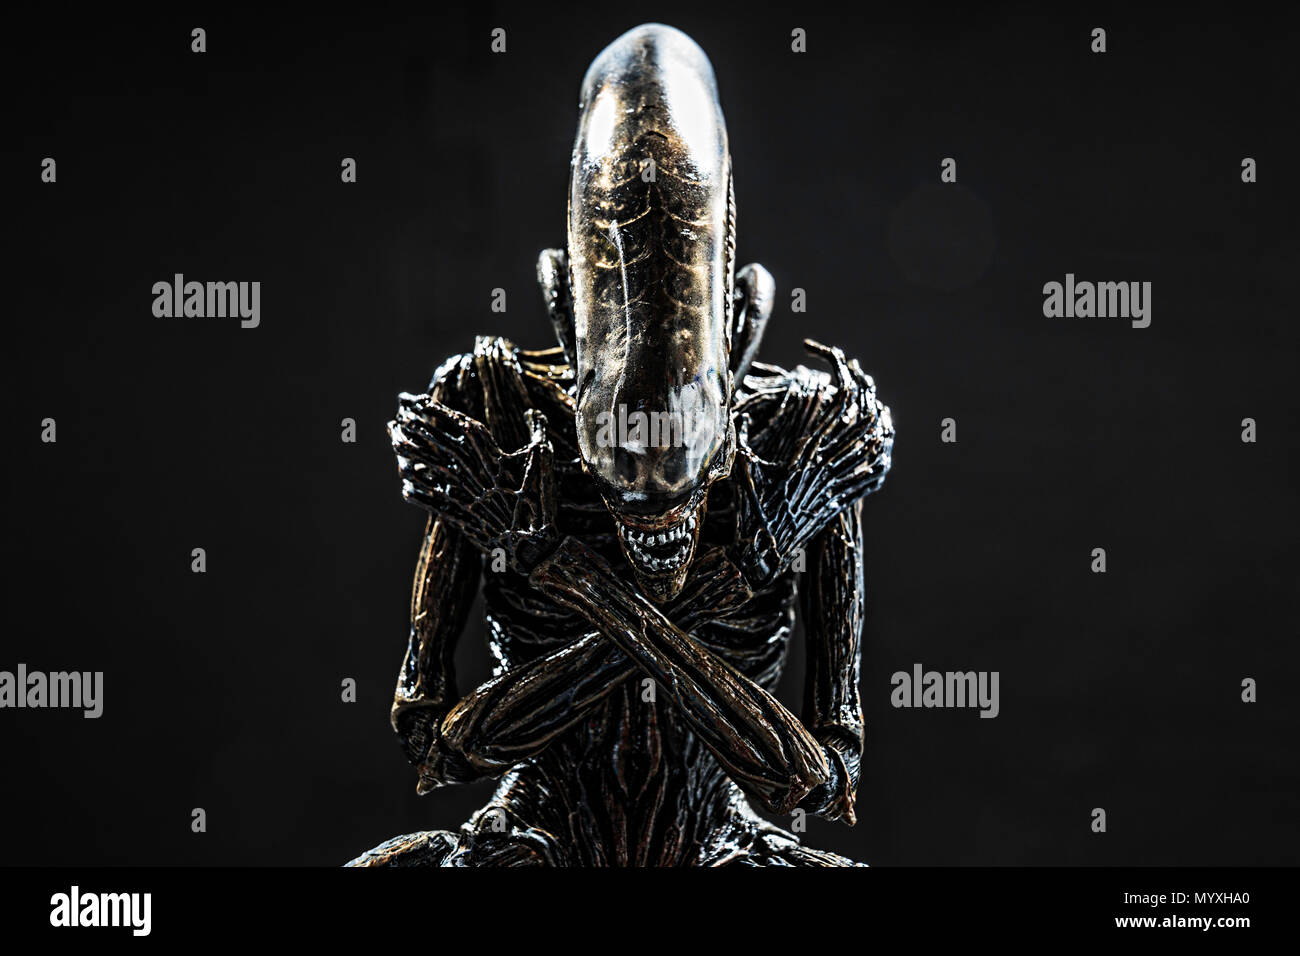 Alien figure from “Alien Covenant” picture, In Crossing Arms position. This is the Alien xenomorph version from 2017 Alien Covenant movie. Made by NEC Stock Photo